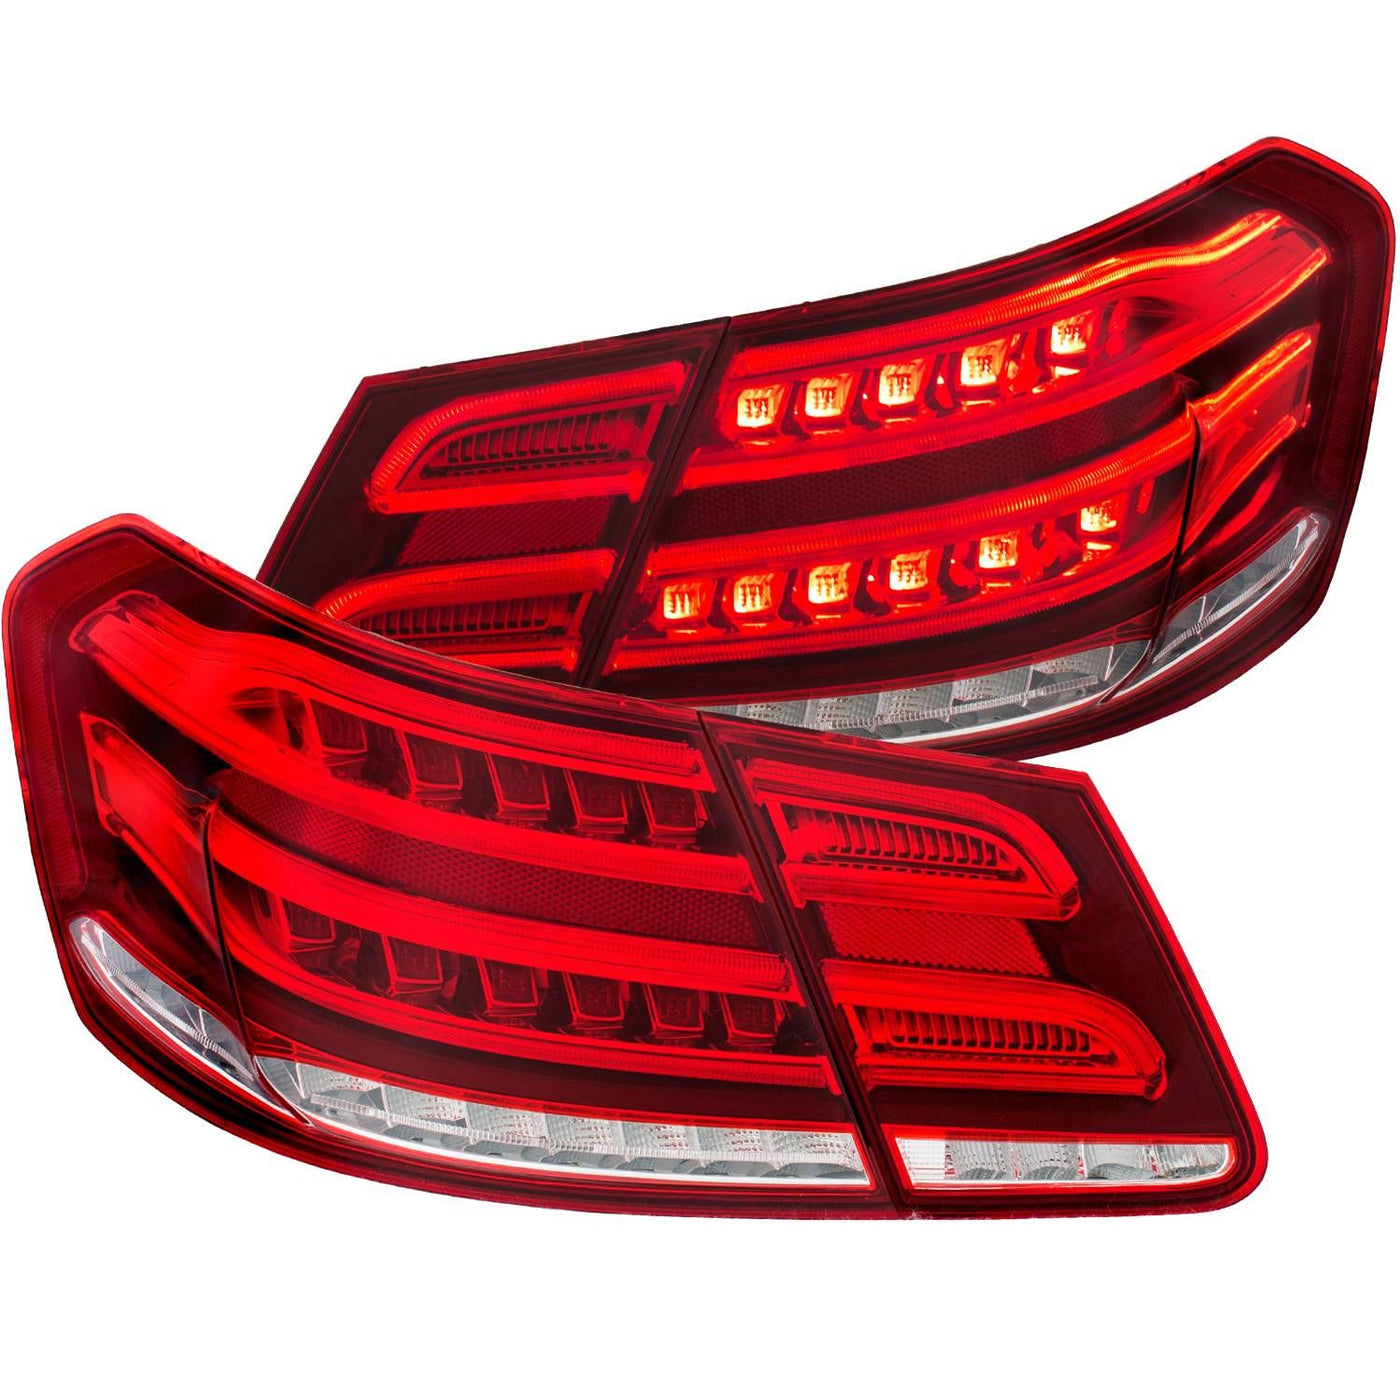 Mercedes Benz Led Tail Lights, E Class Tail Lights, E Class 10-13 Tail Lights,  Red Clear Tail Lights, Anzo Tail Lights